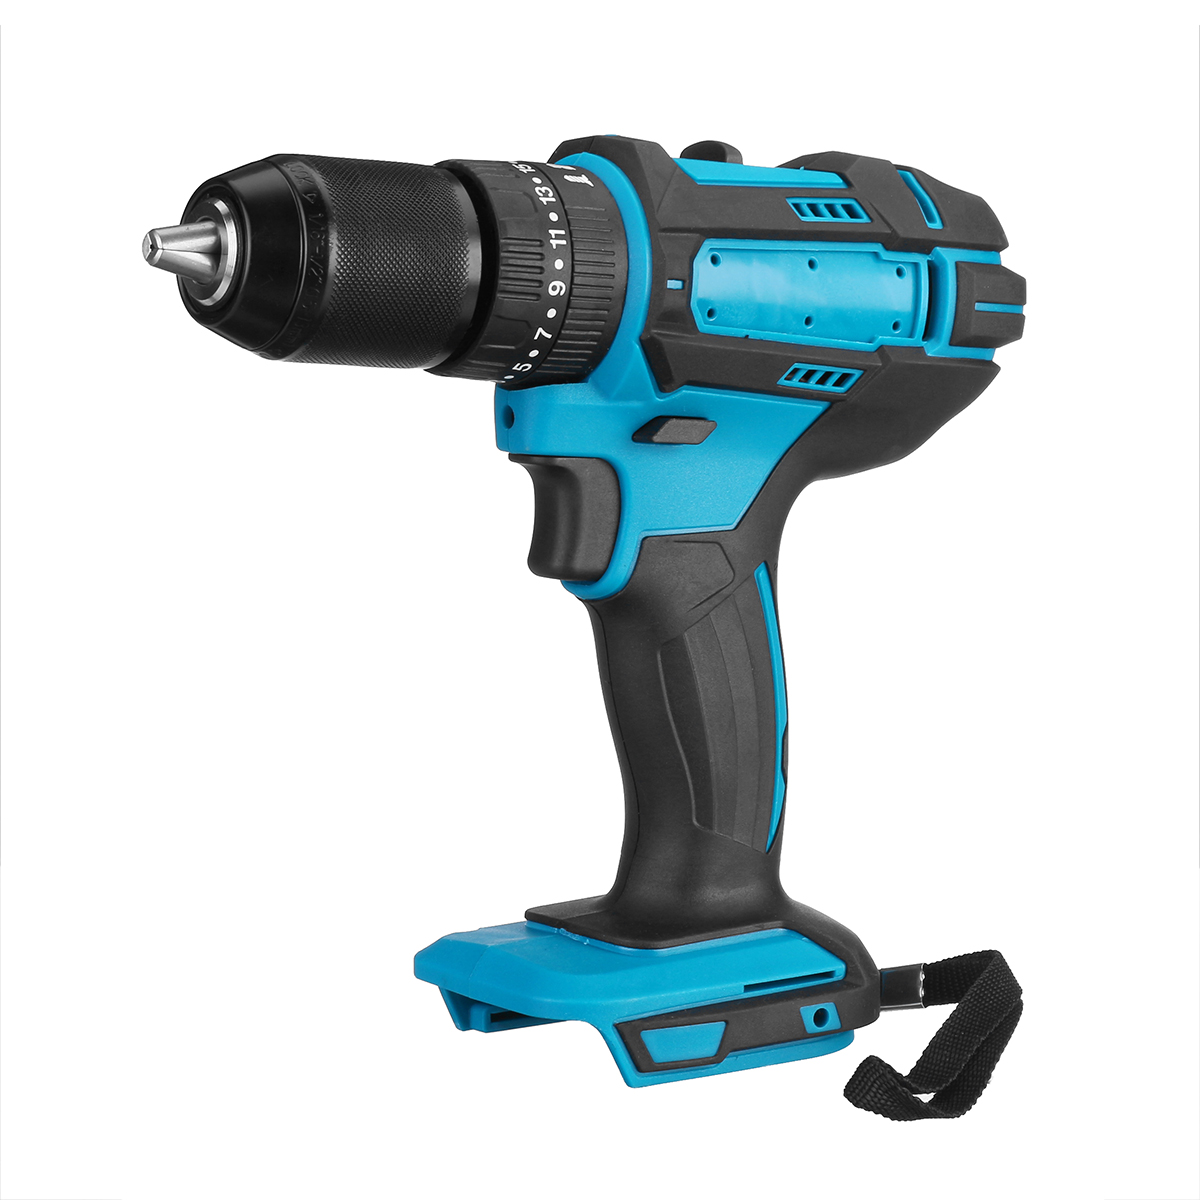 18V-Cordless-Electric-Drill-Driver-Impact-Torque-For-MakitaPower-Tool-1695066-5